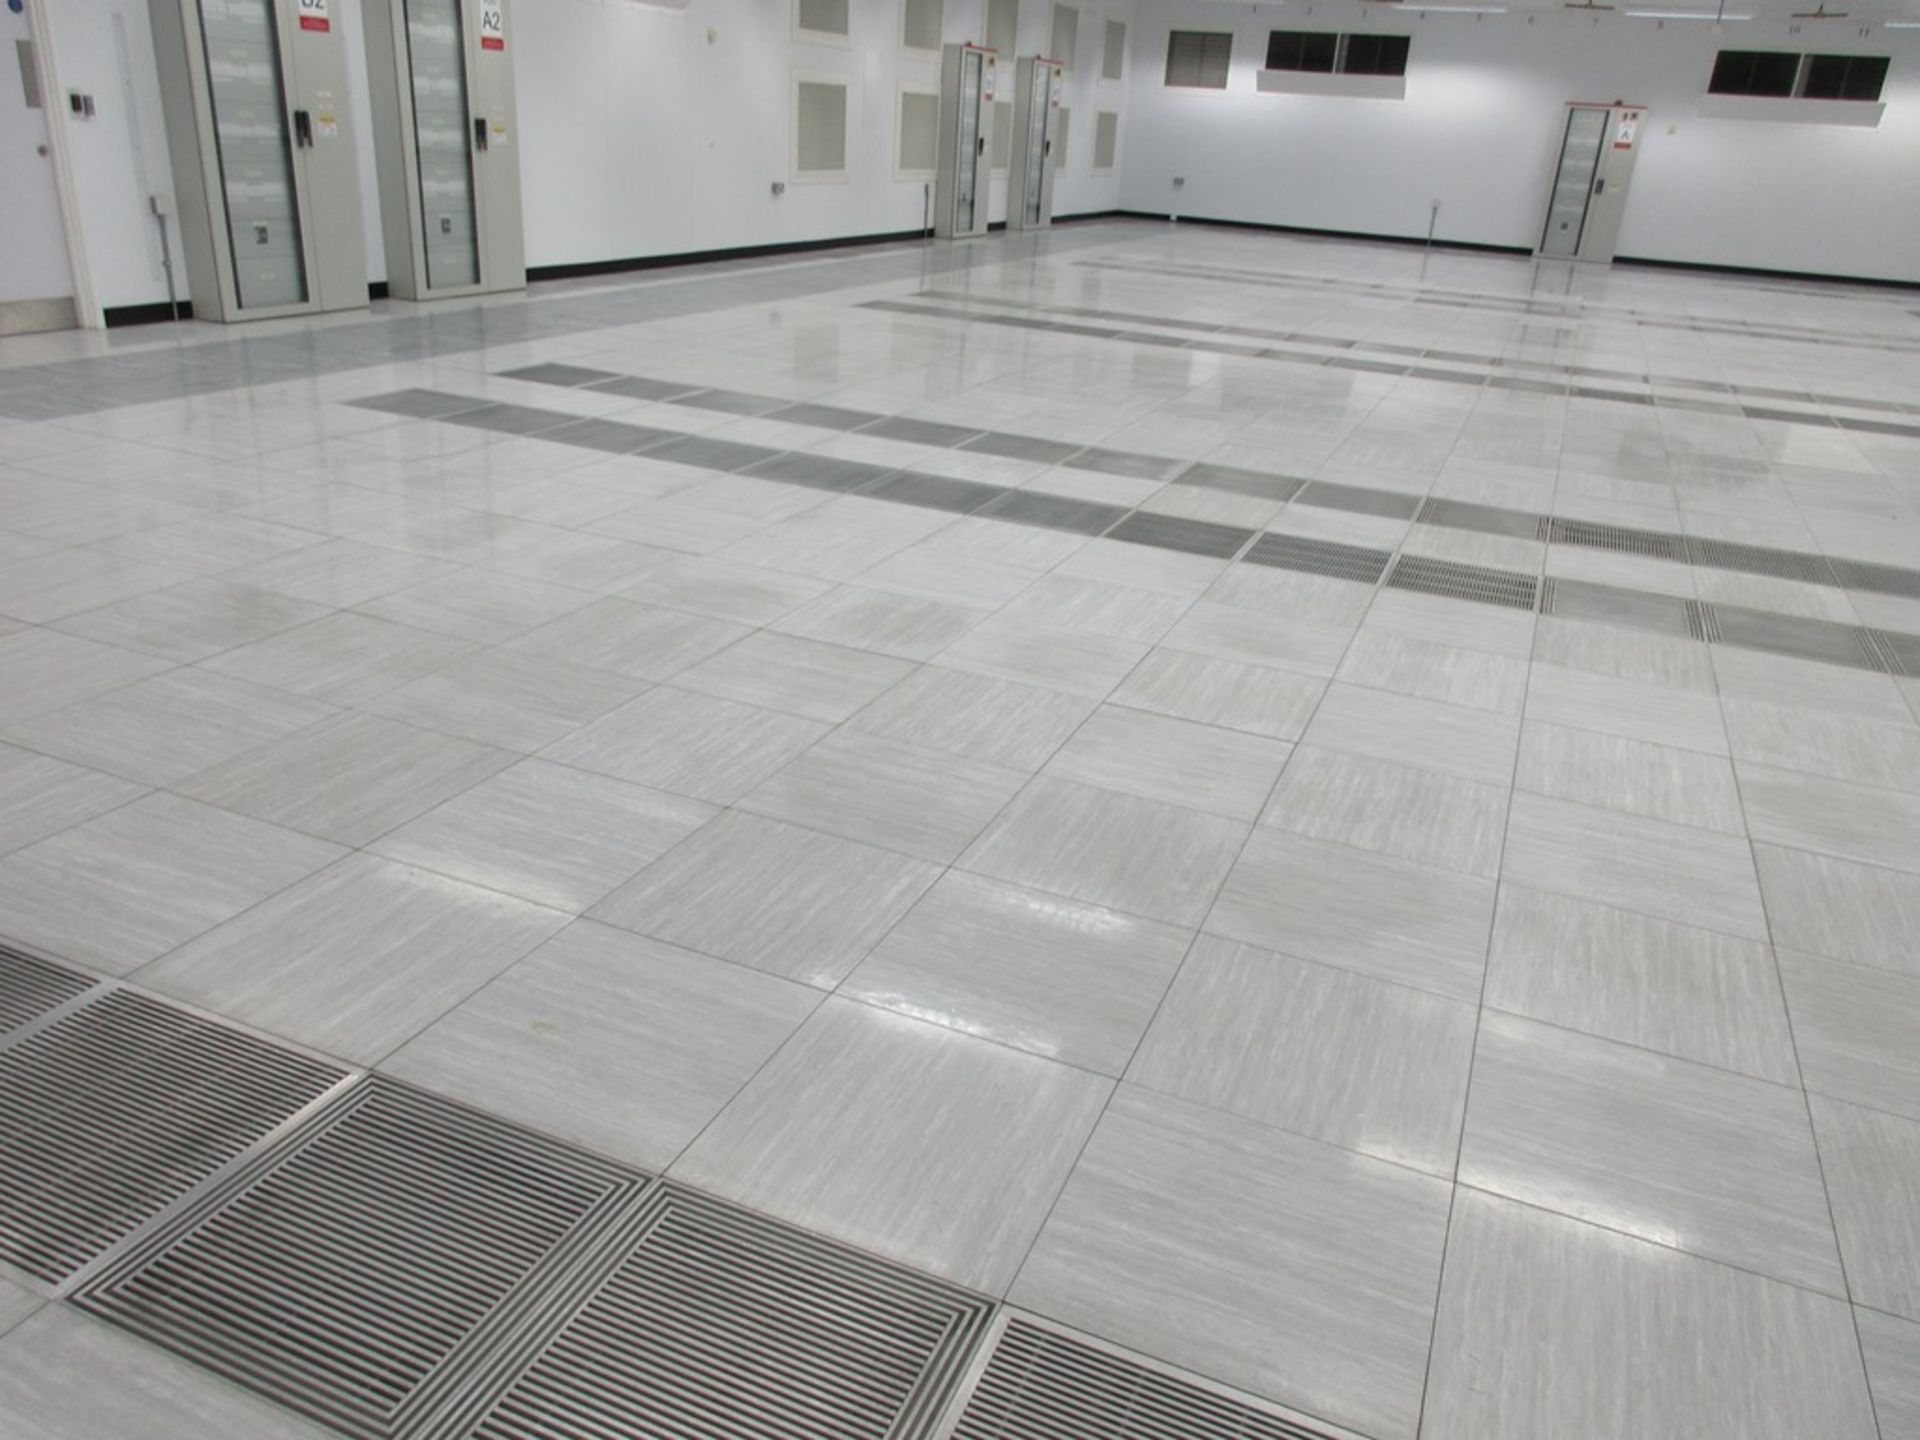 Raised sectional server room modular flooring to approximately 30 x 25m, 650mm high with single - Image 3 of 8